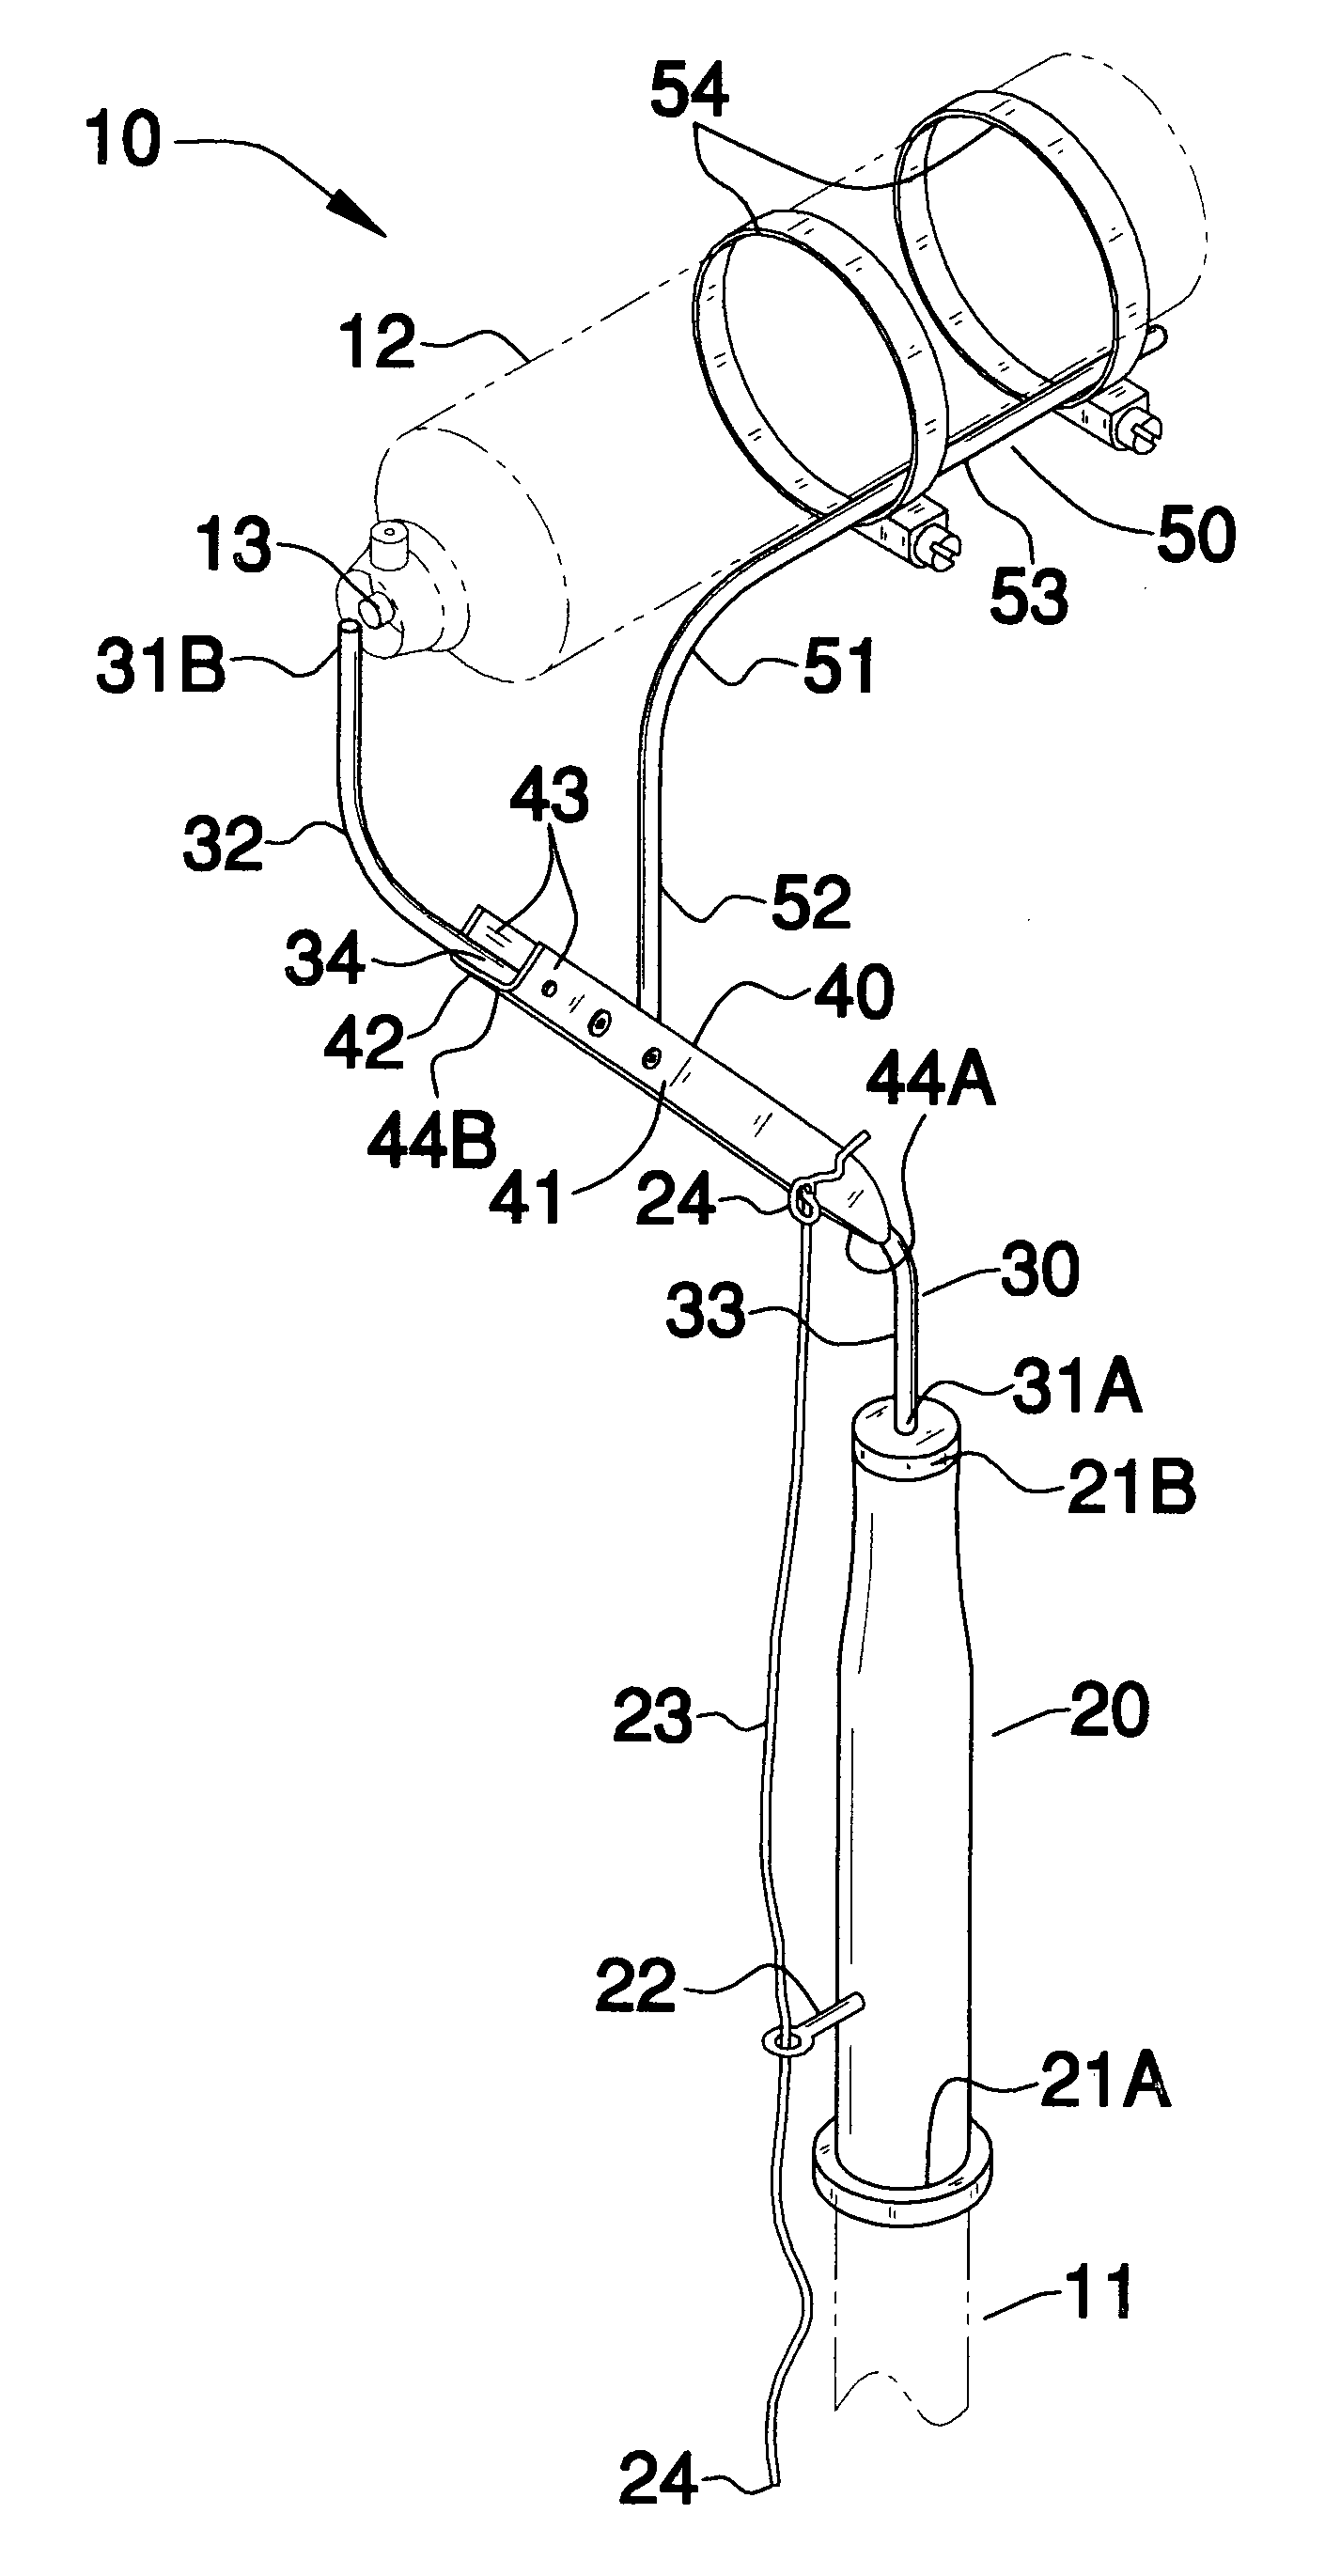 Apparatus for remotely supporting and operating an aerosol canister